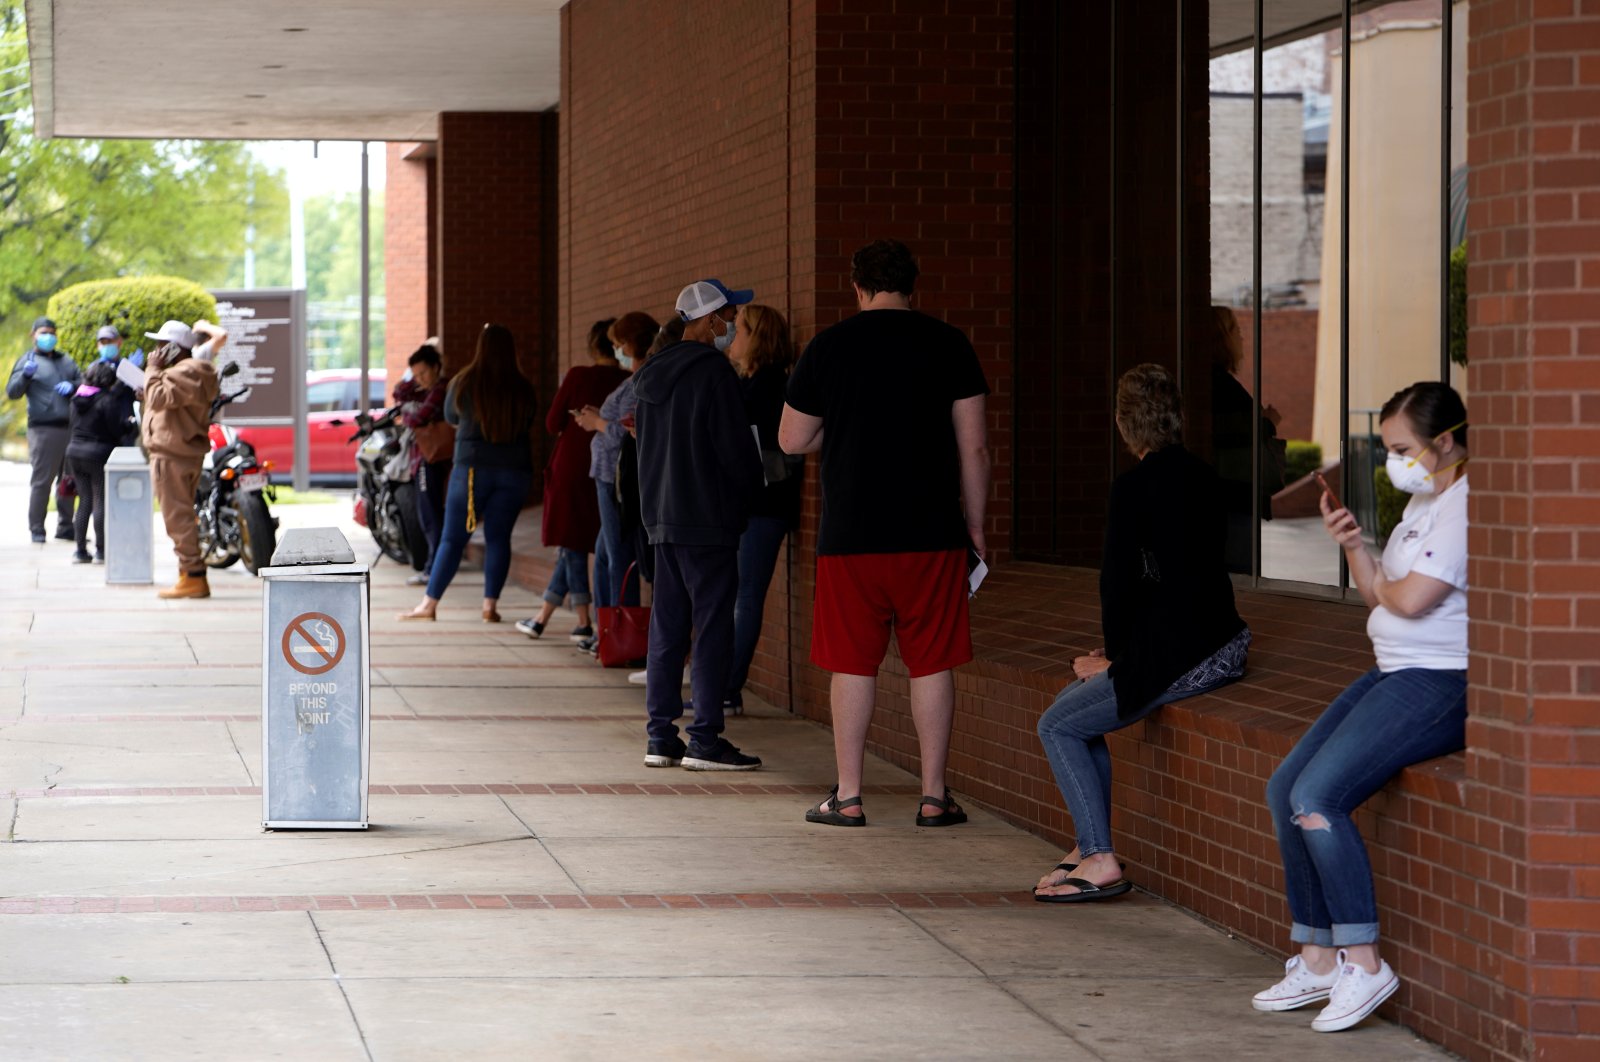 People who lost their jobs wait in line to file for unemployment following an outbreak of the coronavirus, at an Arkansas Workforce Center in Fort Smith, Arkansas, U.S., April 6, 2020. (Reuters Photo)